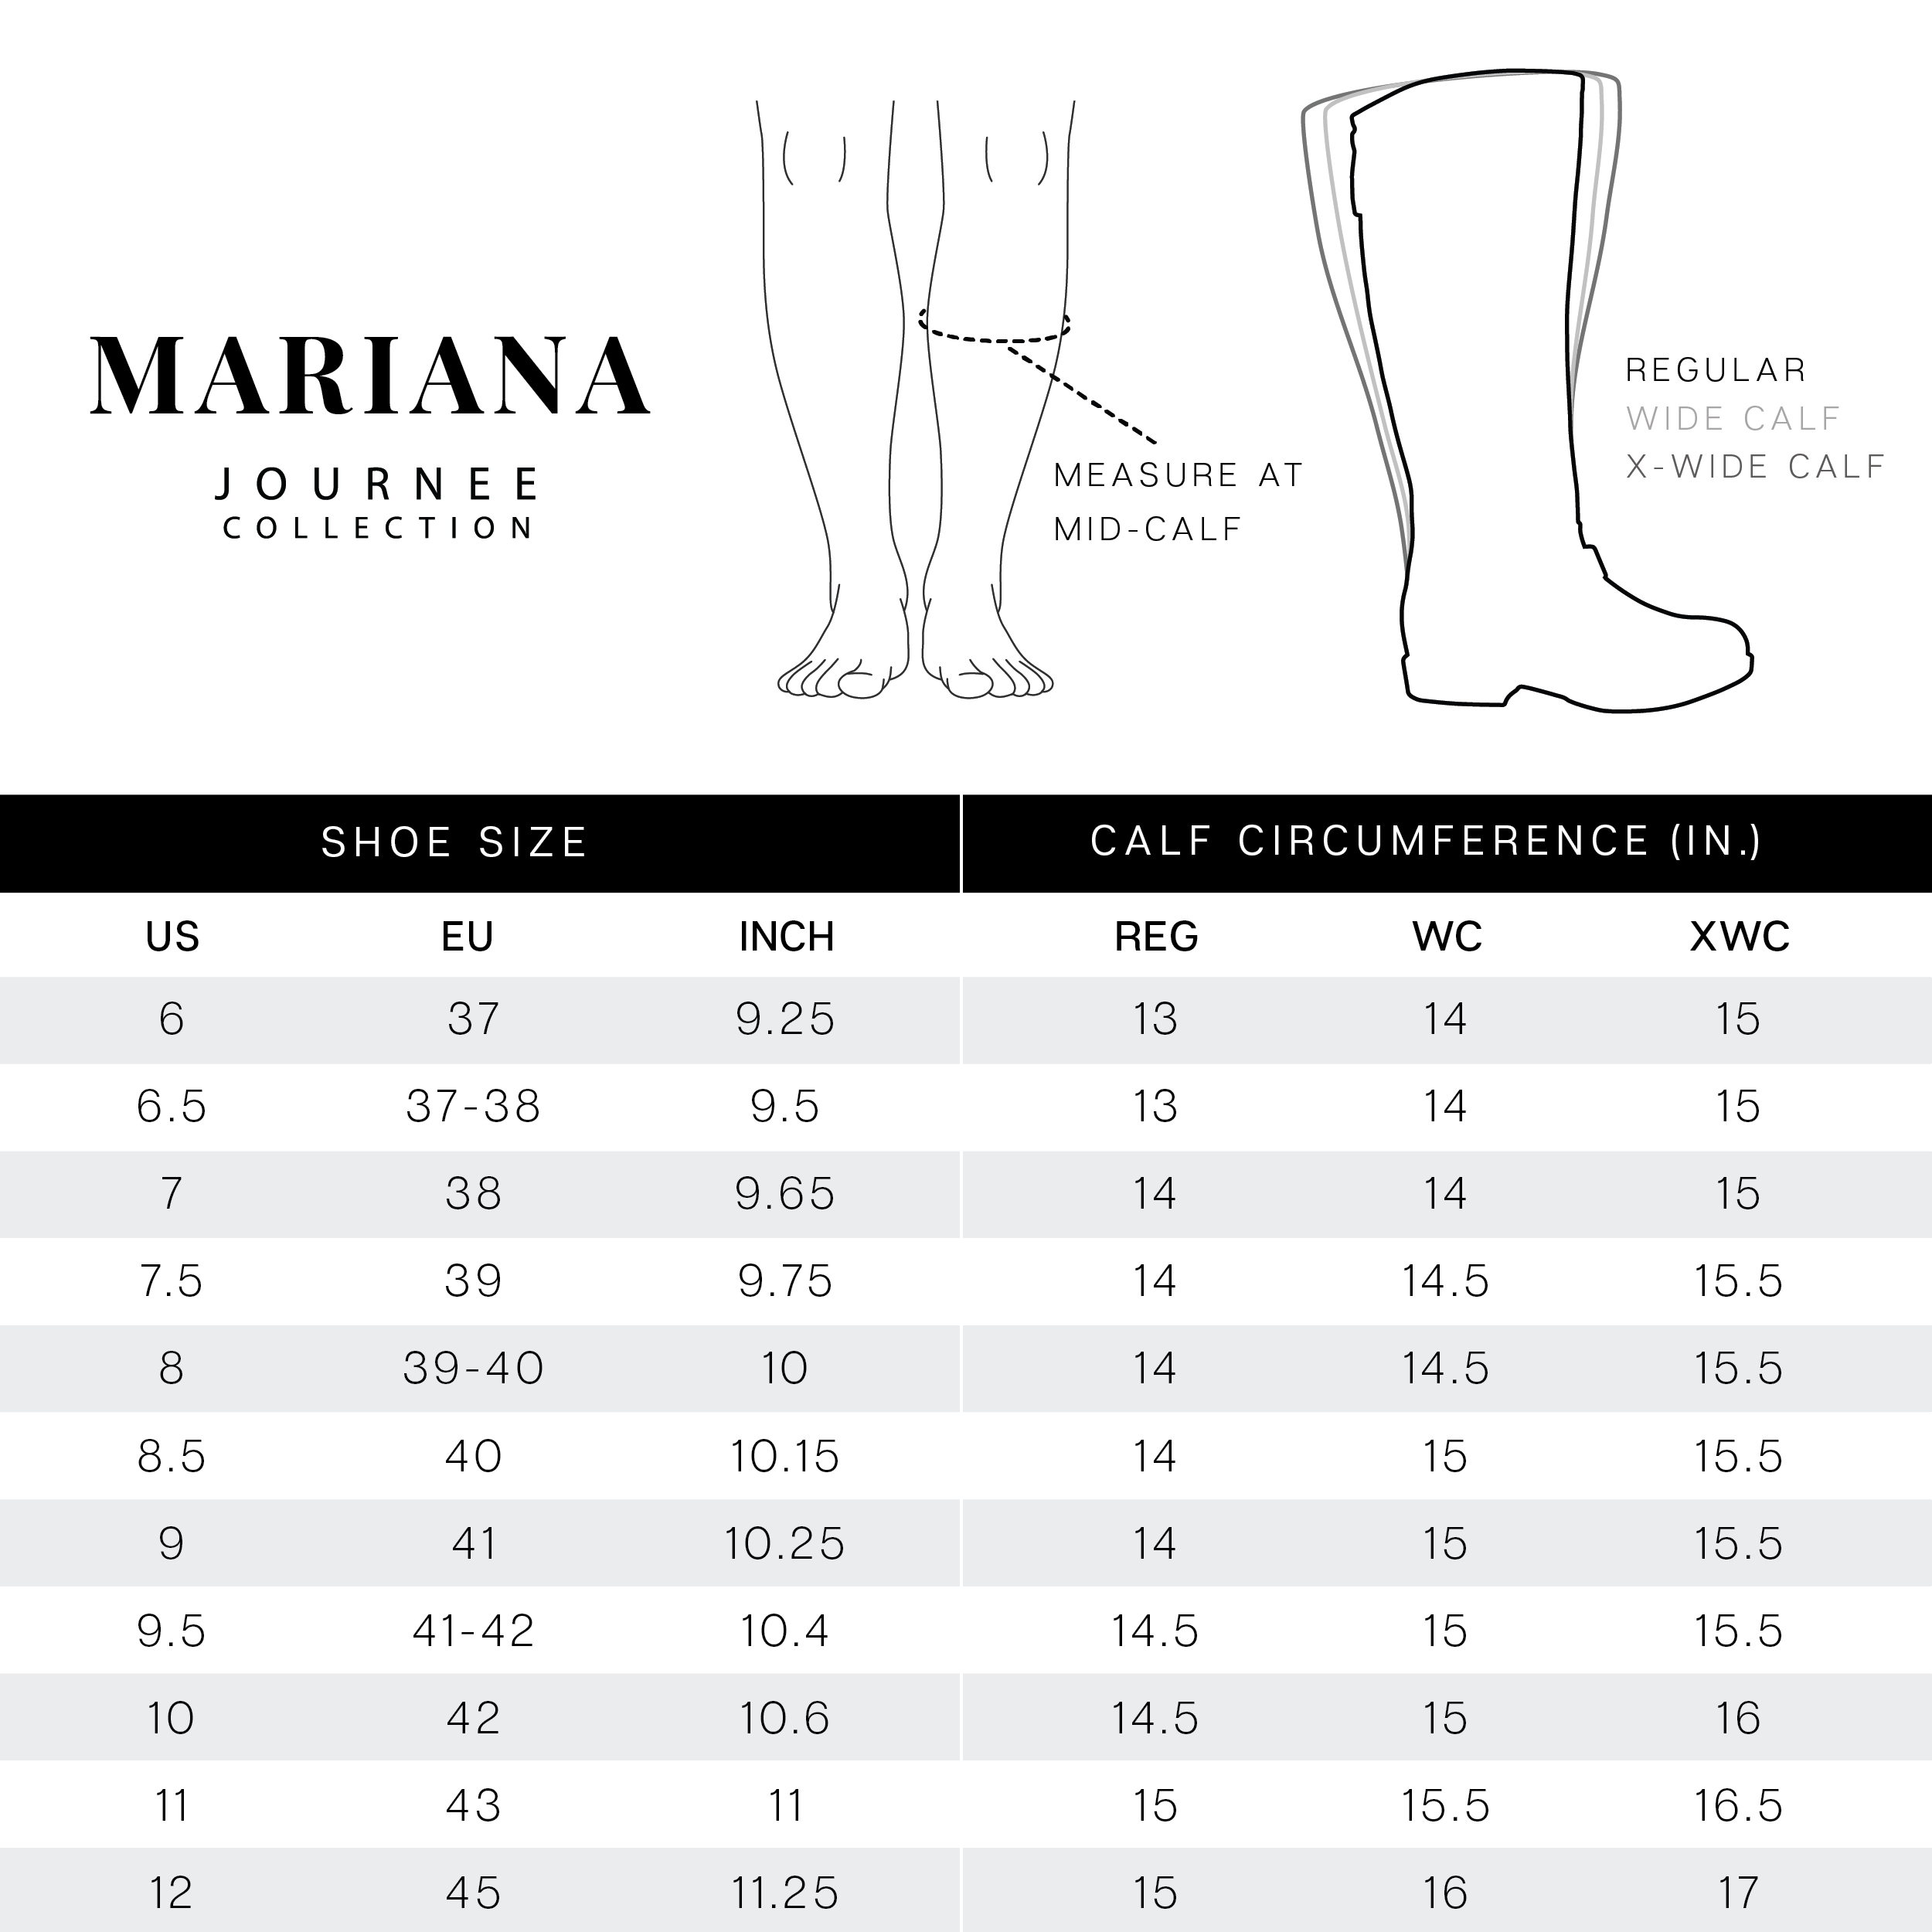 MARIANA WIDE CALF - Journee Collection